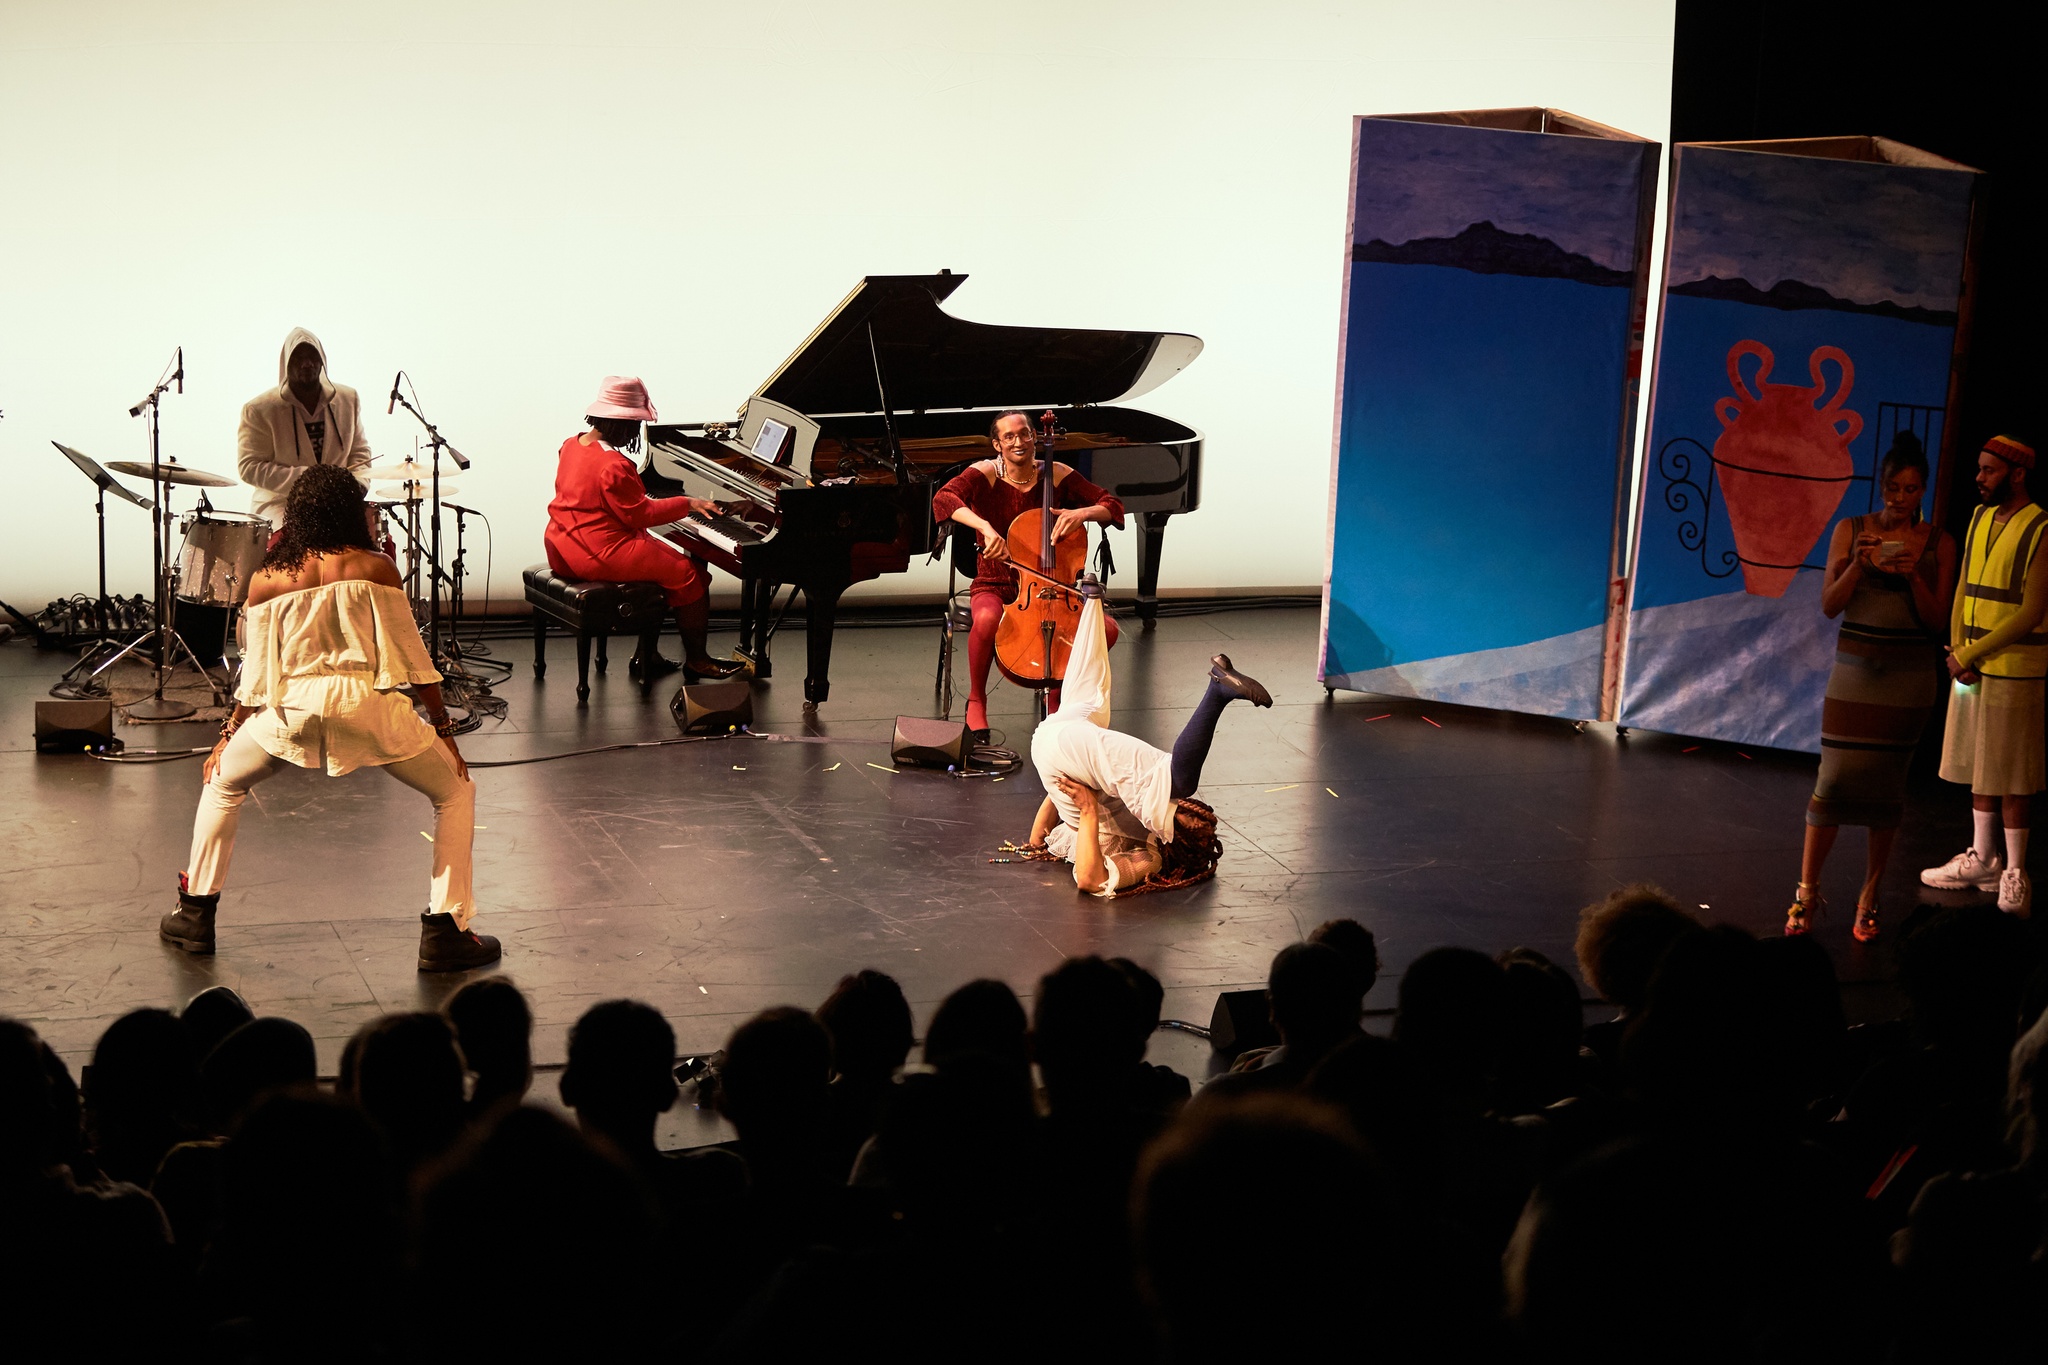 Dancers and musicians performing together on a stage.